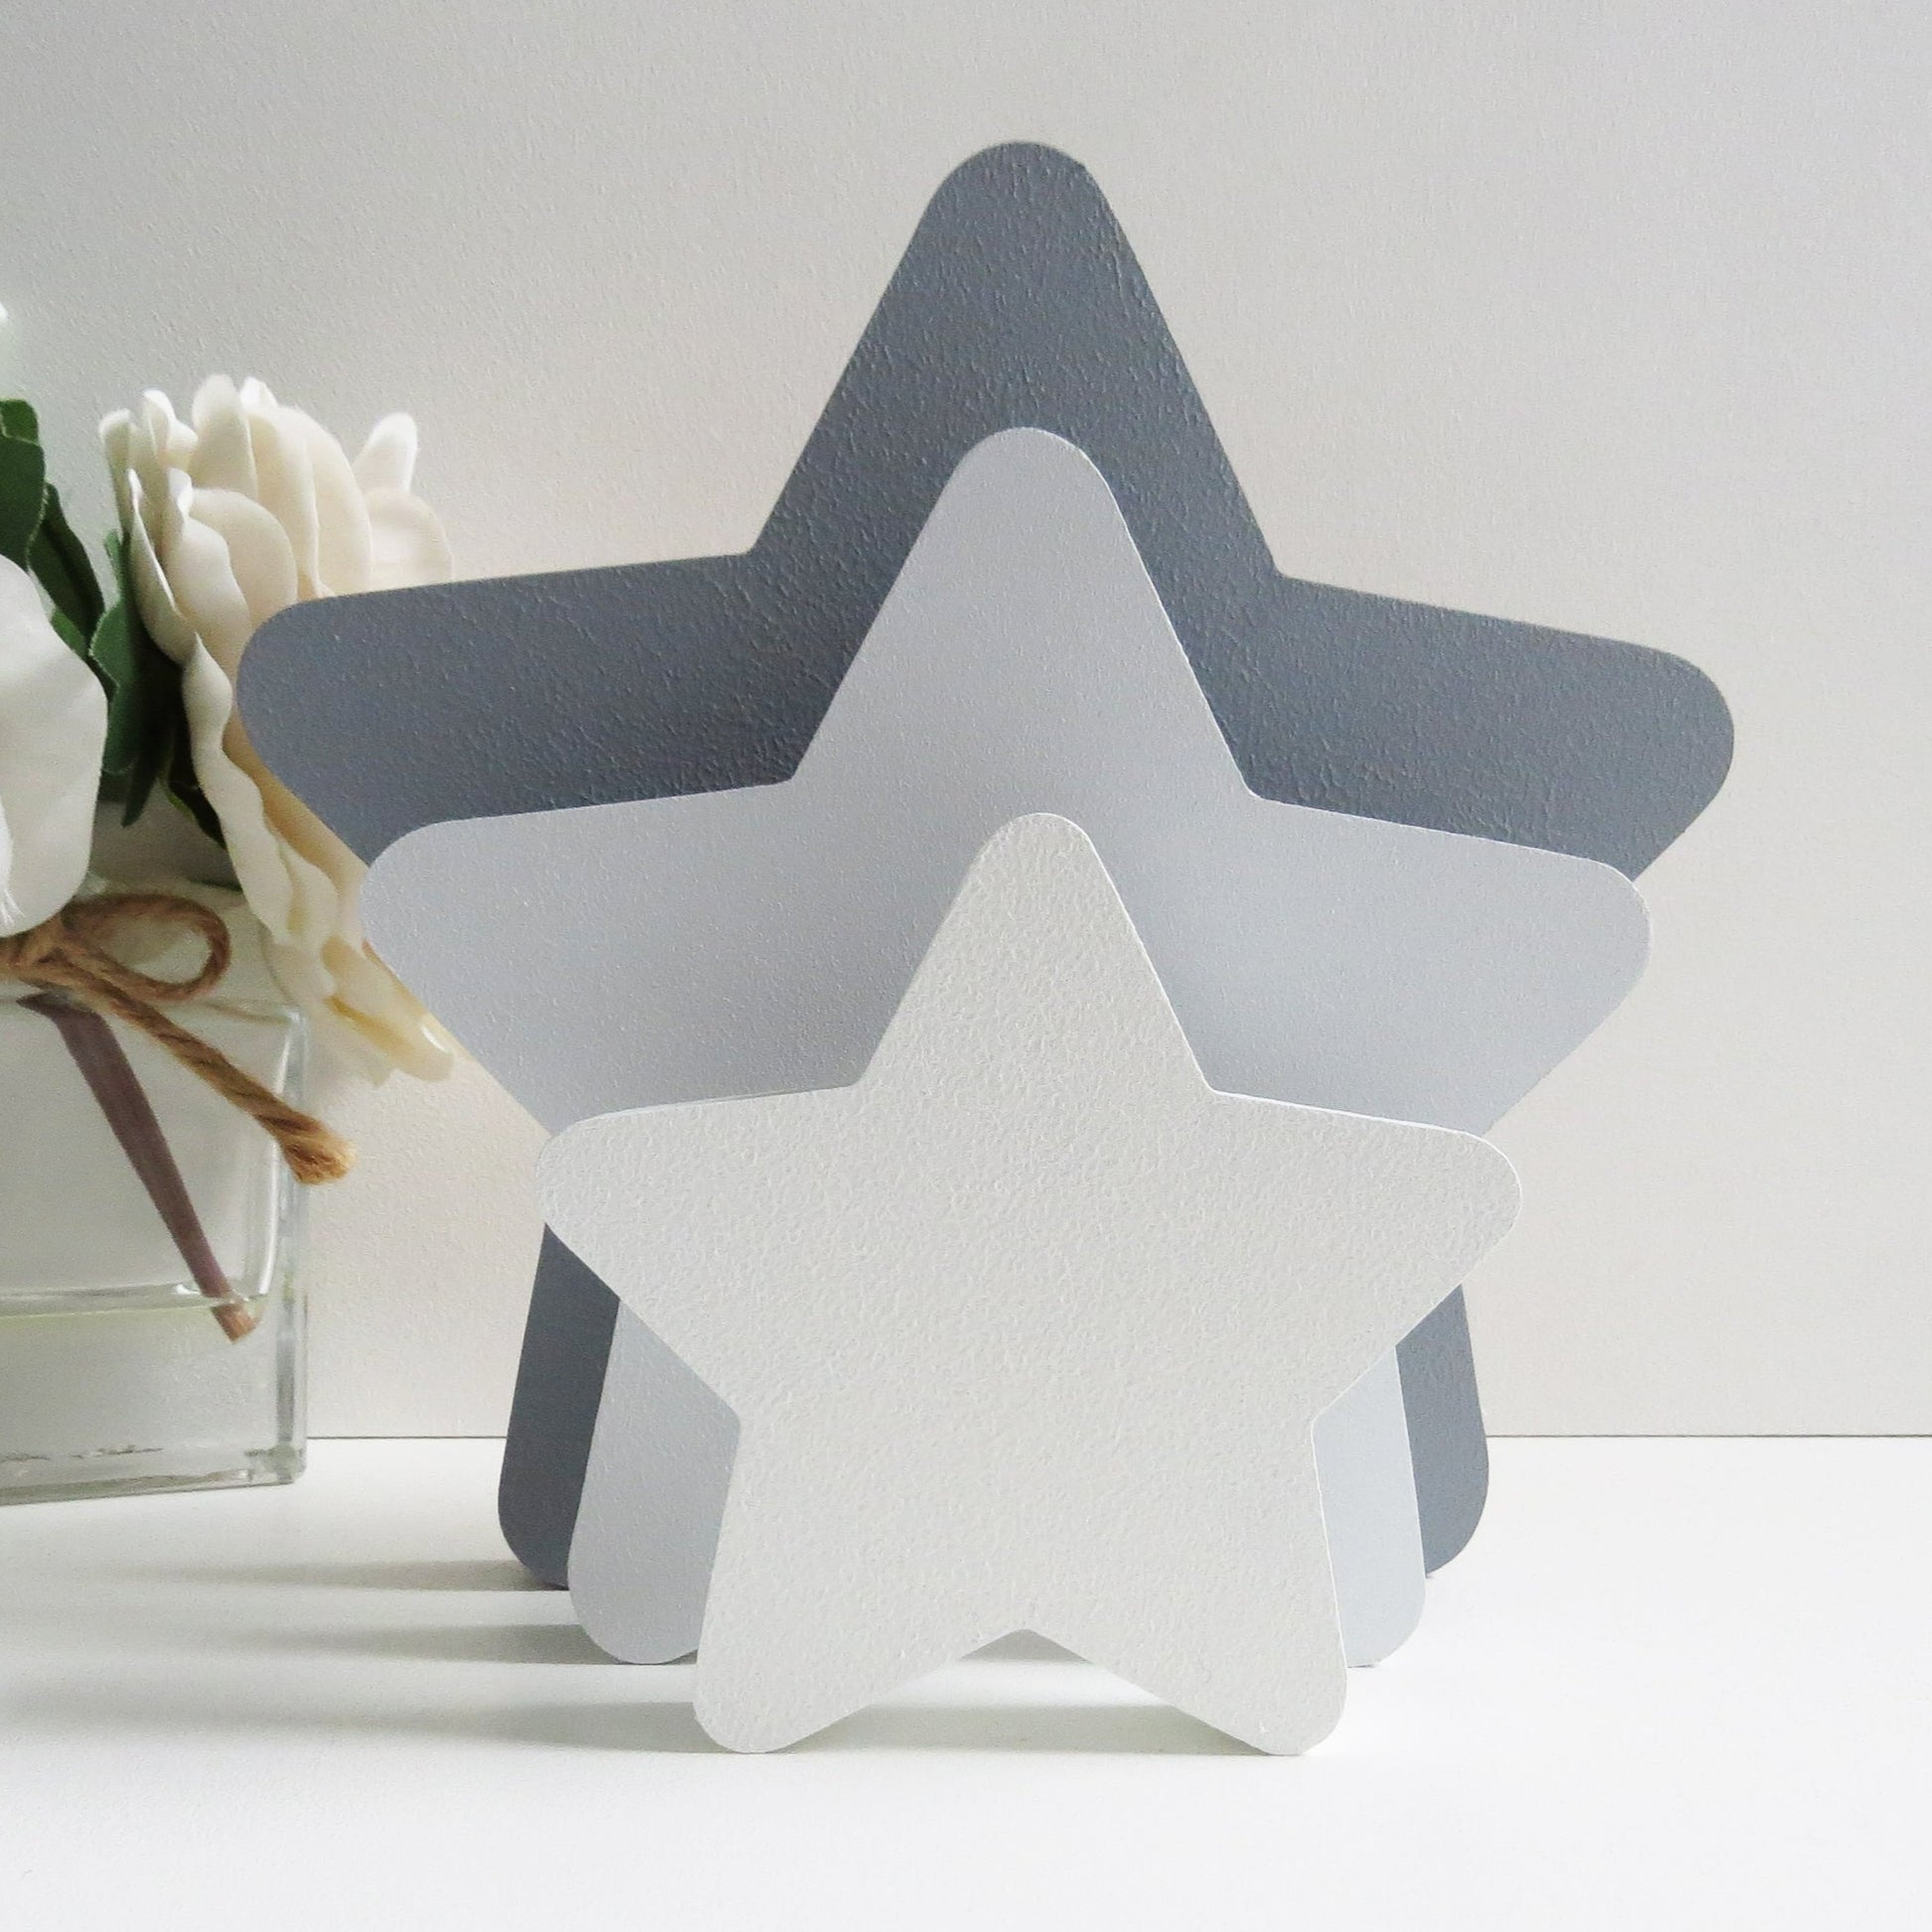 Painted grey freestanding star blocks for a childrens nursery.